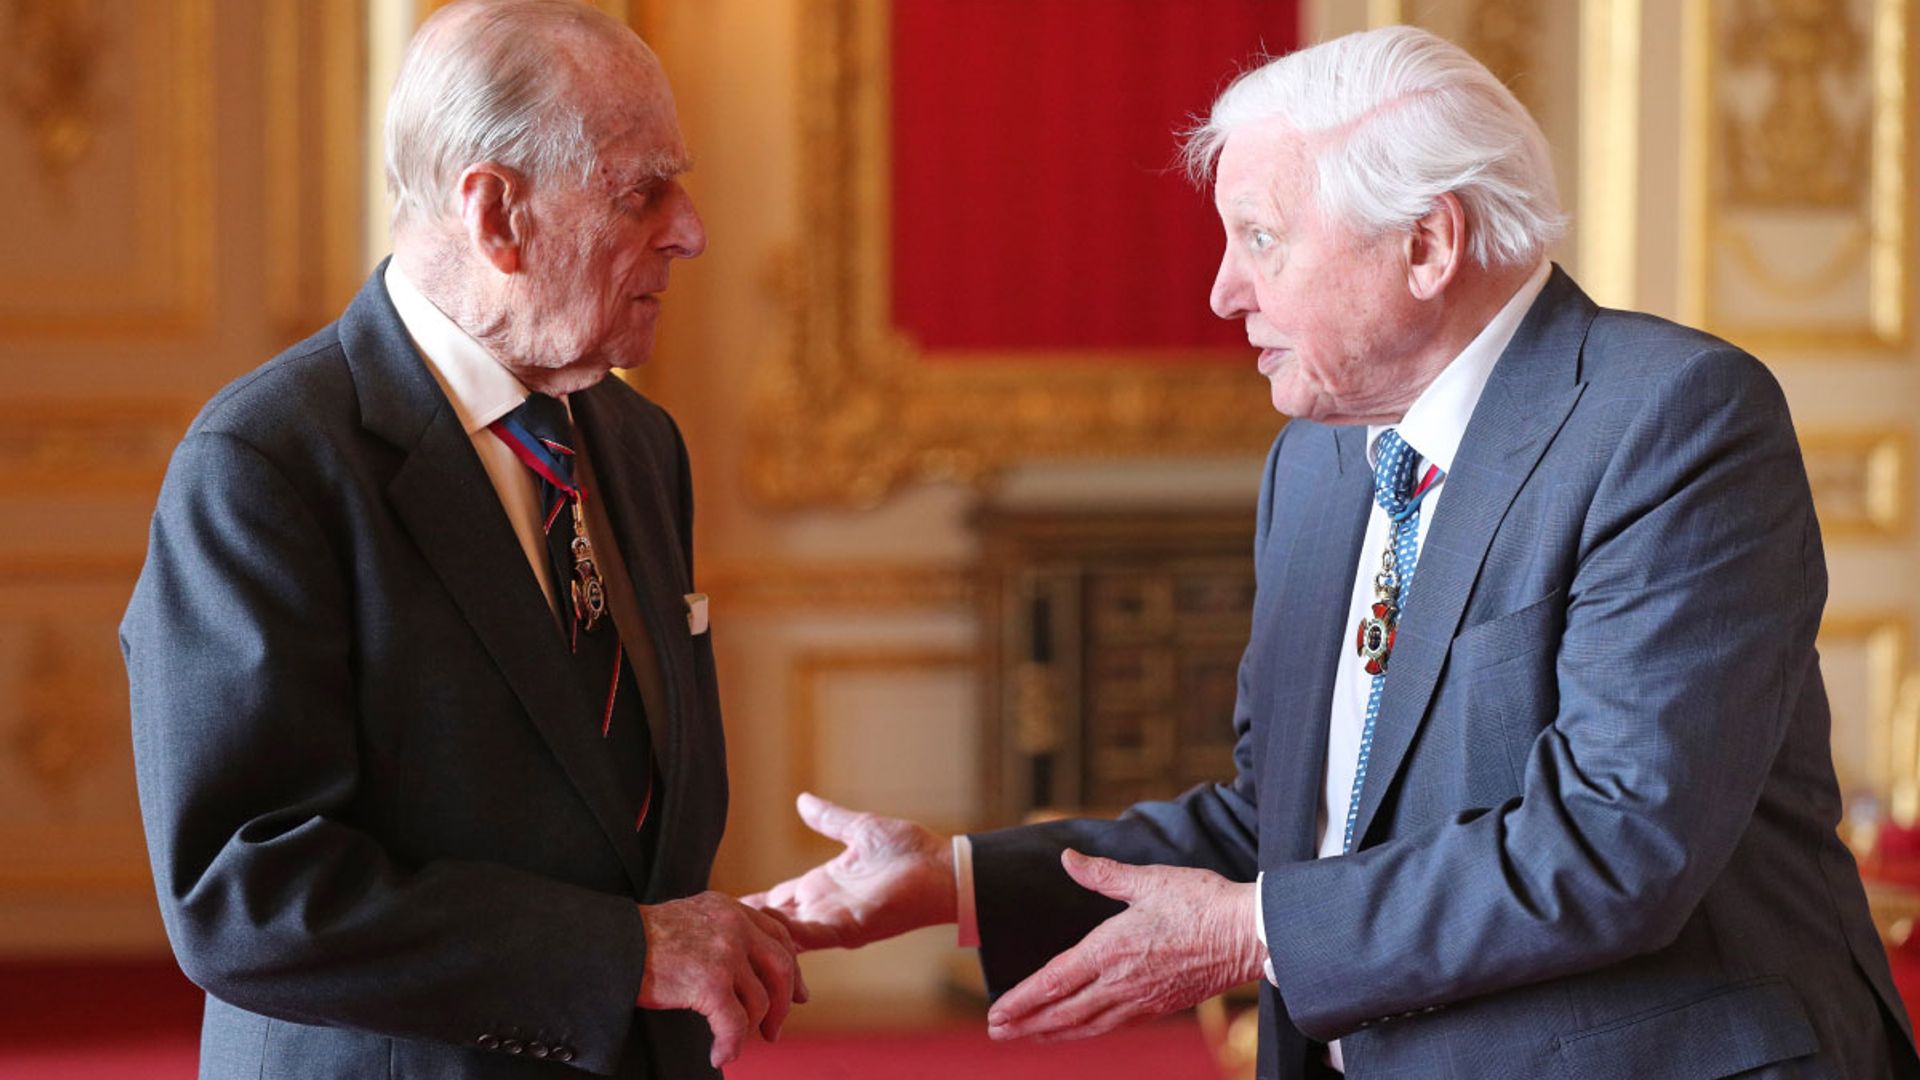 David Attenborough pays tribute to 'extraordinary' friend as Prince Philip is laid to rest